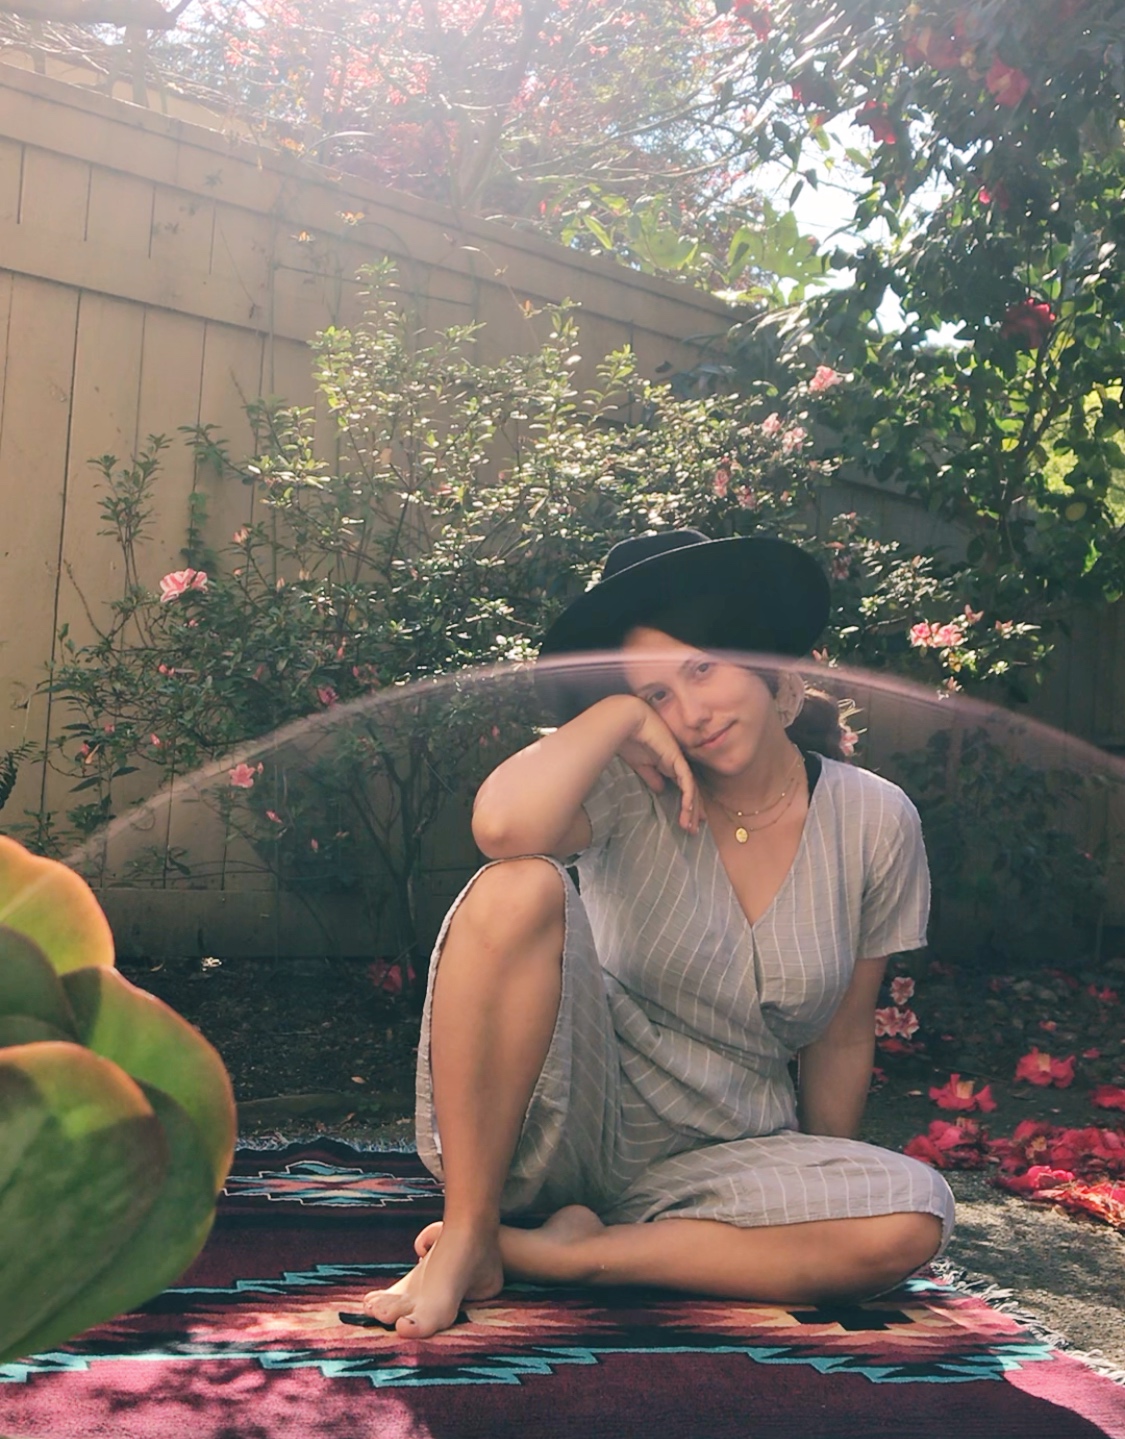 Thrifted outfit in my garden